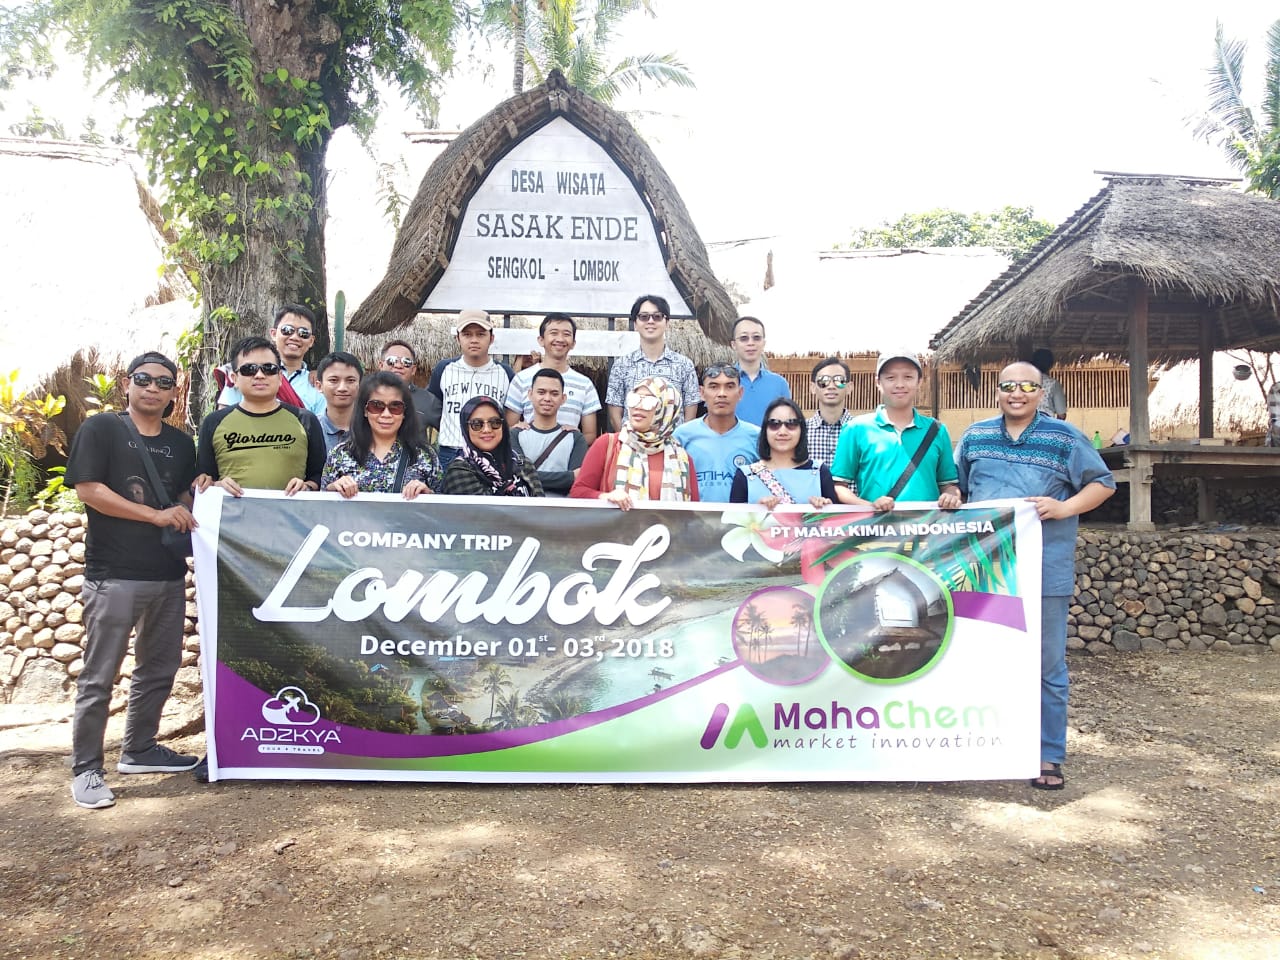 LOMBOK TOUR 01-03 DES 2018 WITH PT MAHAKIMIA CHEMICAL INDONESIA